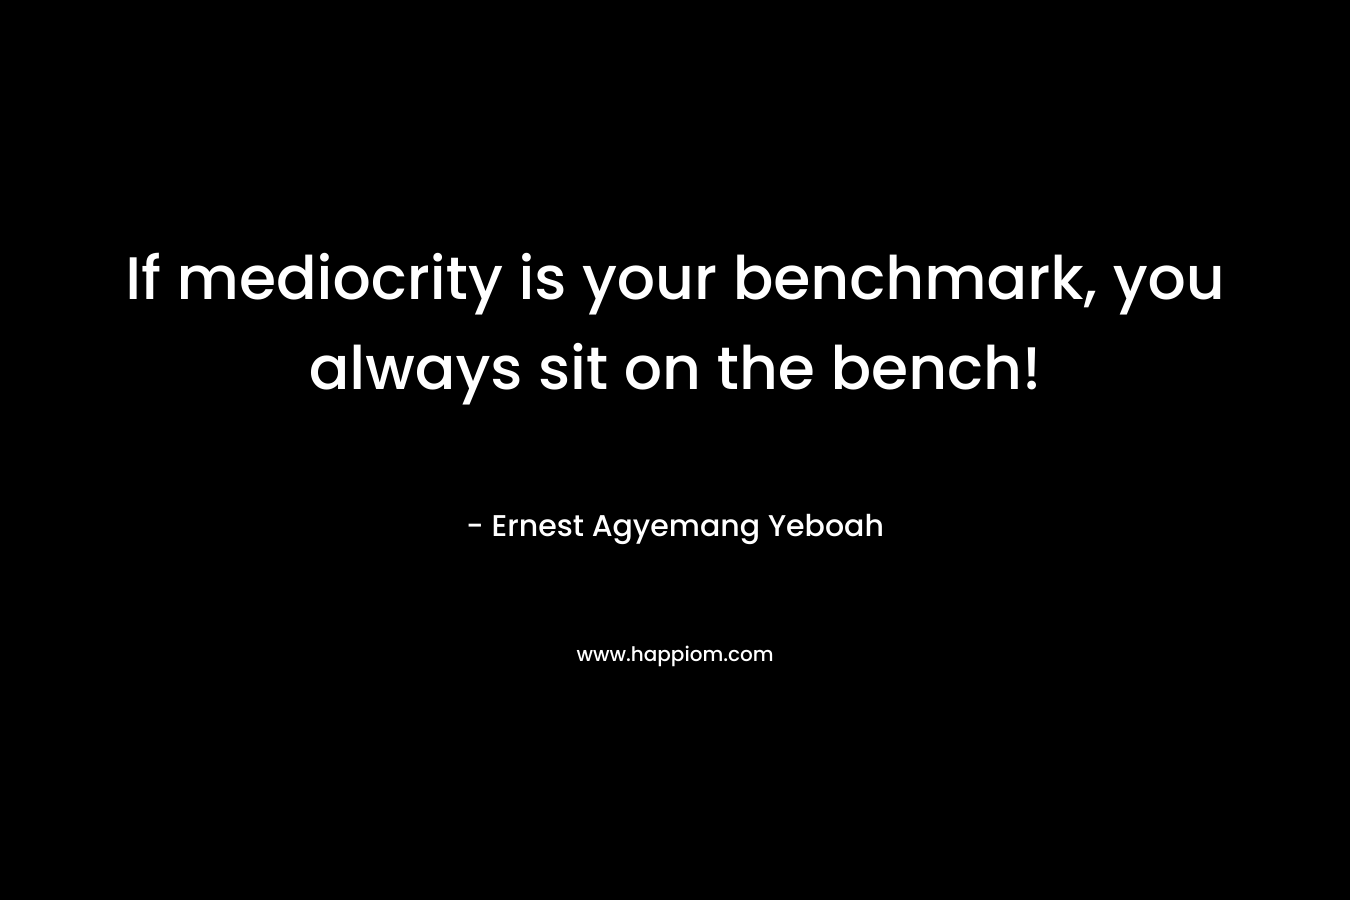 If mediocrity is your benchmark, you always sit on the bench! – Ernest Agyemang Yeboah